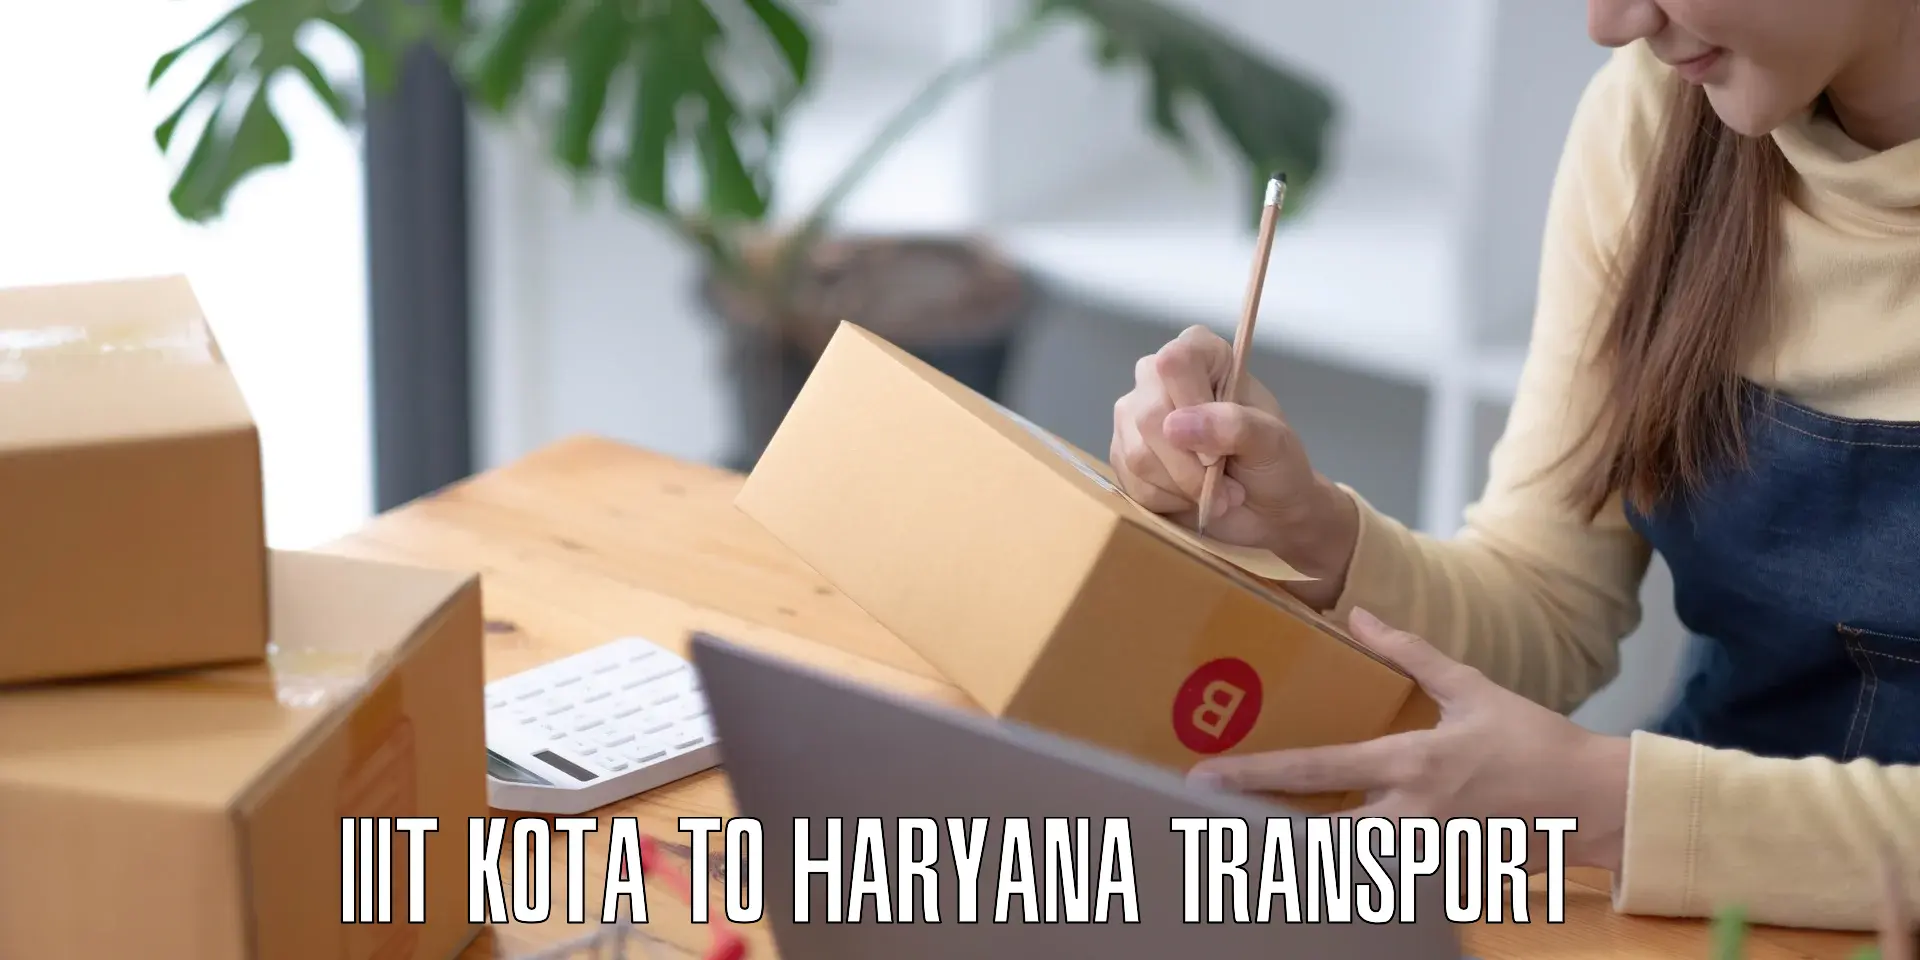 Road transport online services in IIIT Kota to Bhiwani